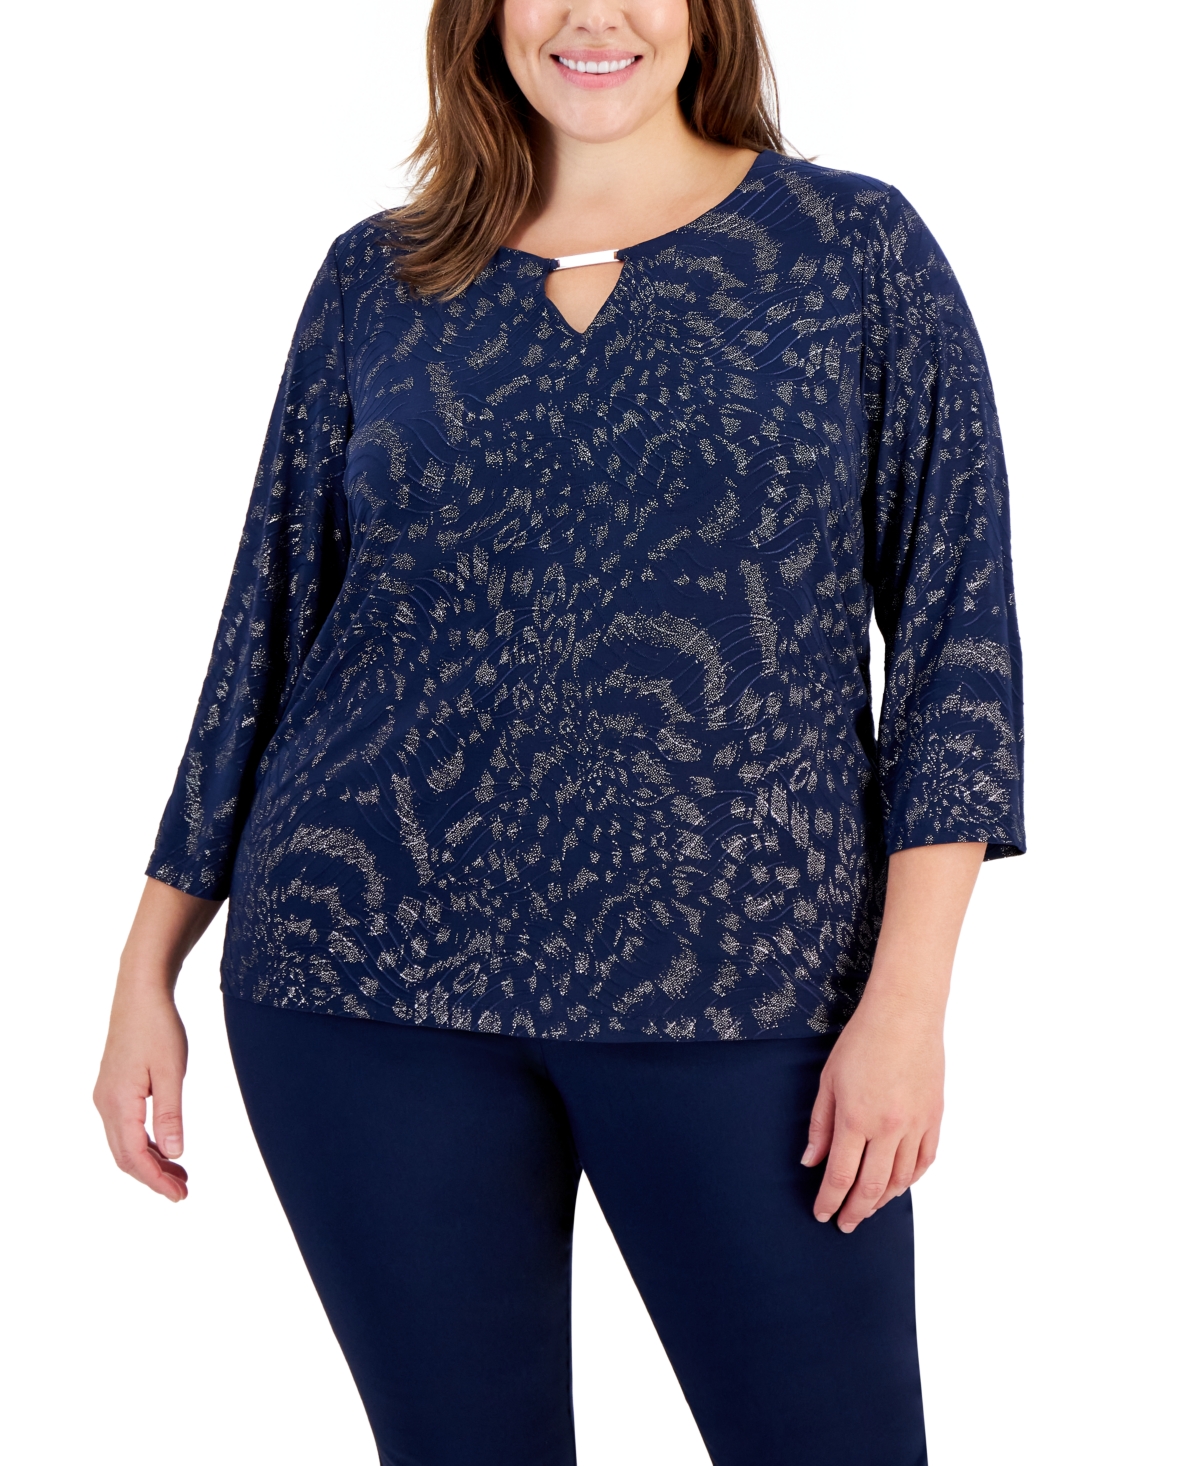 Jm Collection Plus Size Cheetah Glitter Keyhole Top, Created for Macy's